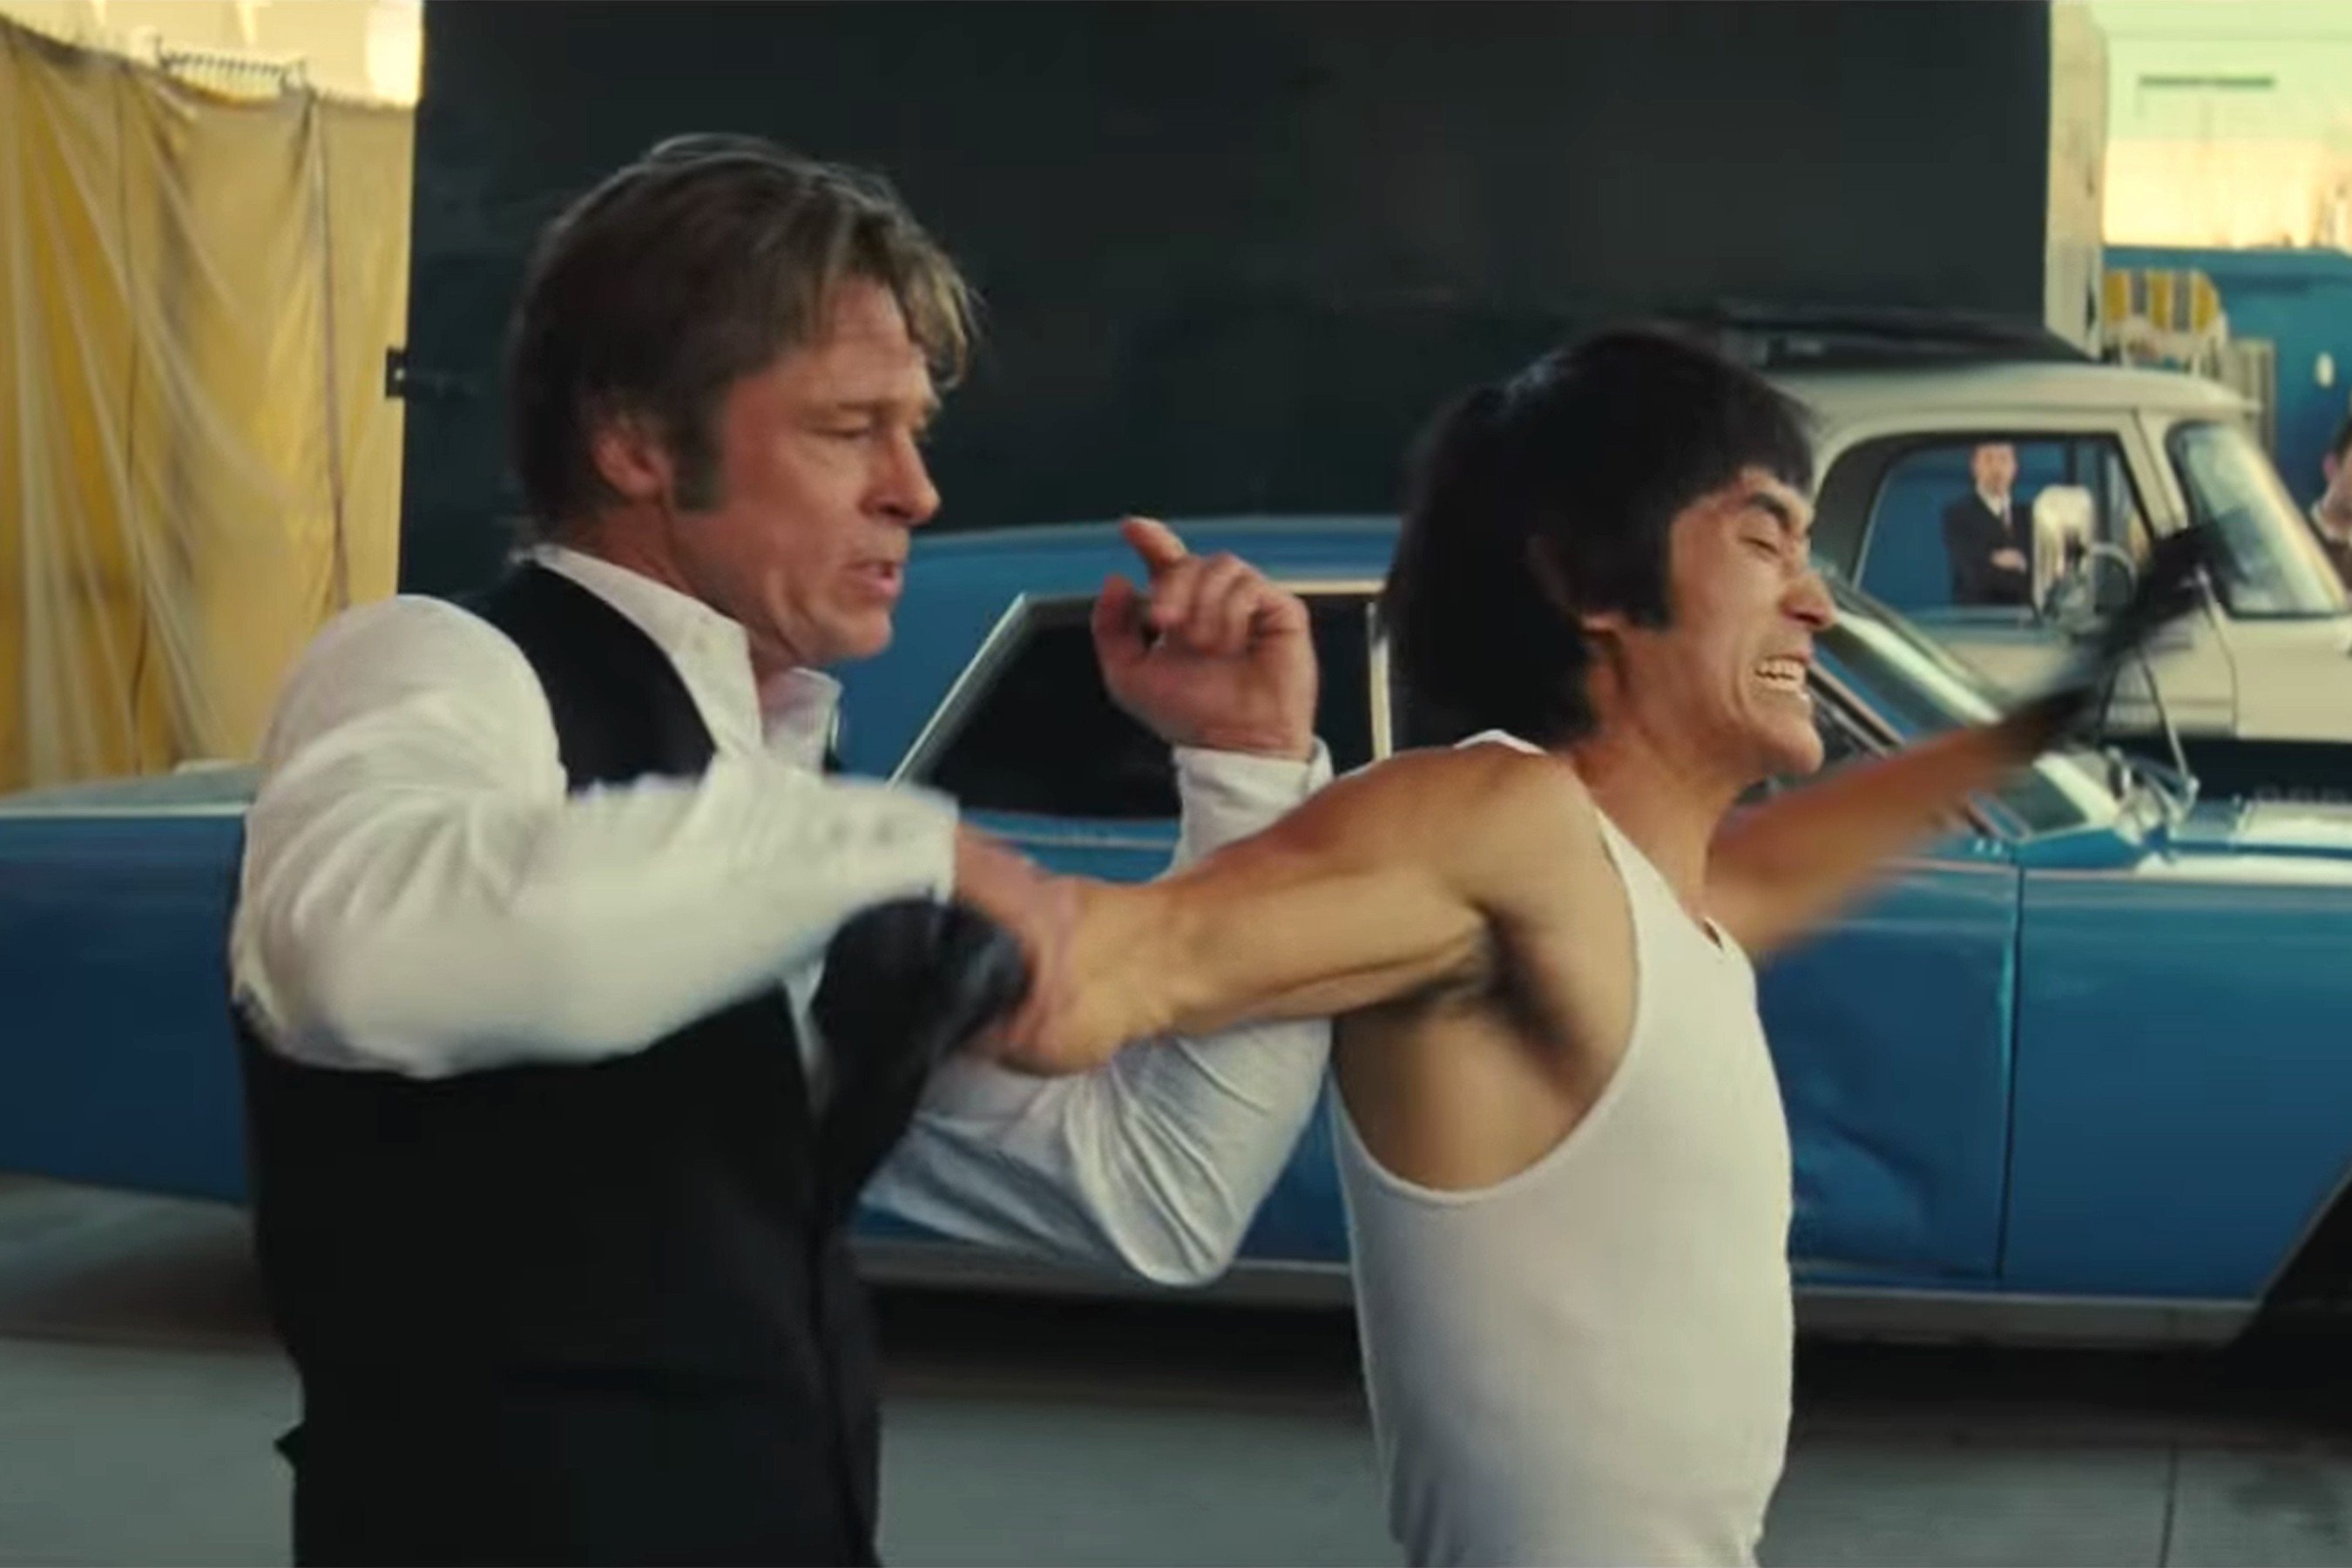 Brad Pitt’s character fights Bruce Lee (Mike Moh) in Quentin Tarantino’s ‘Once Upon a Time in Hollywood’. Photo: Sony Pictures Entertainment